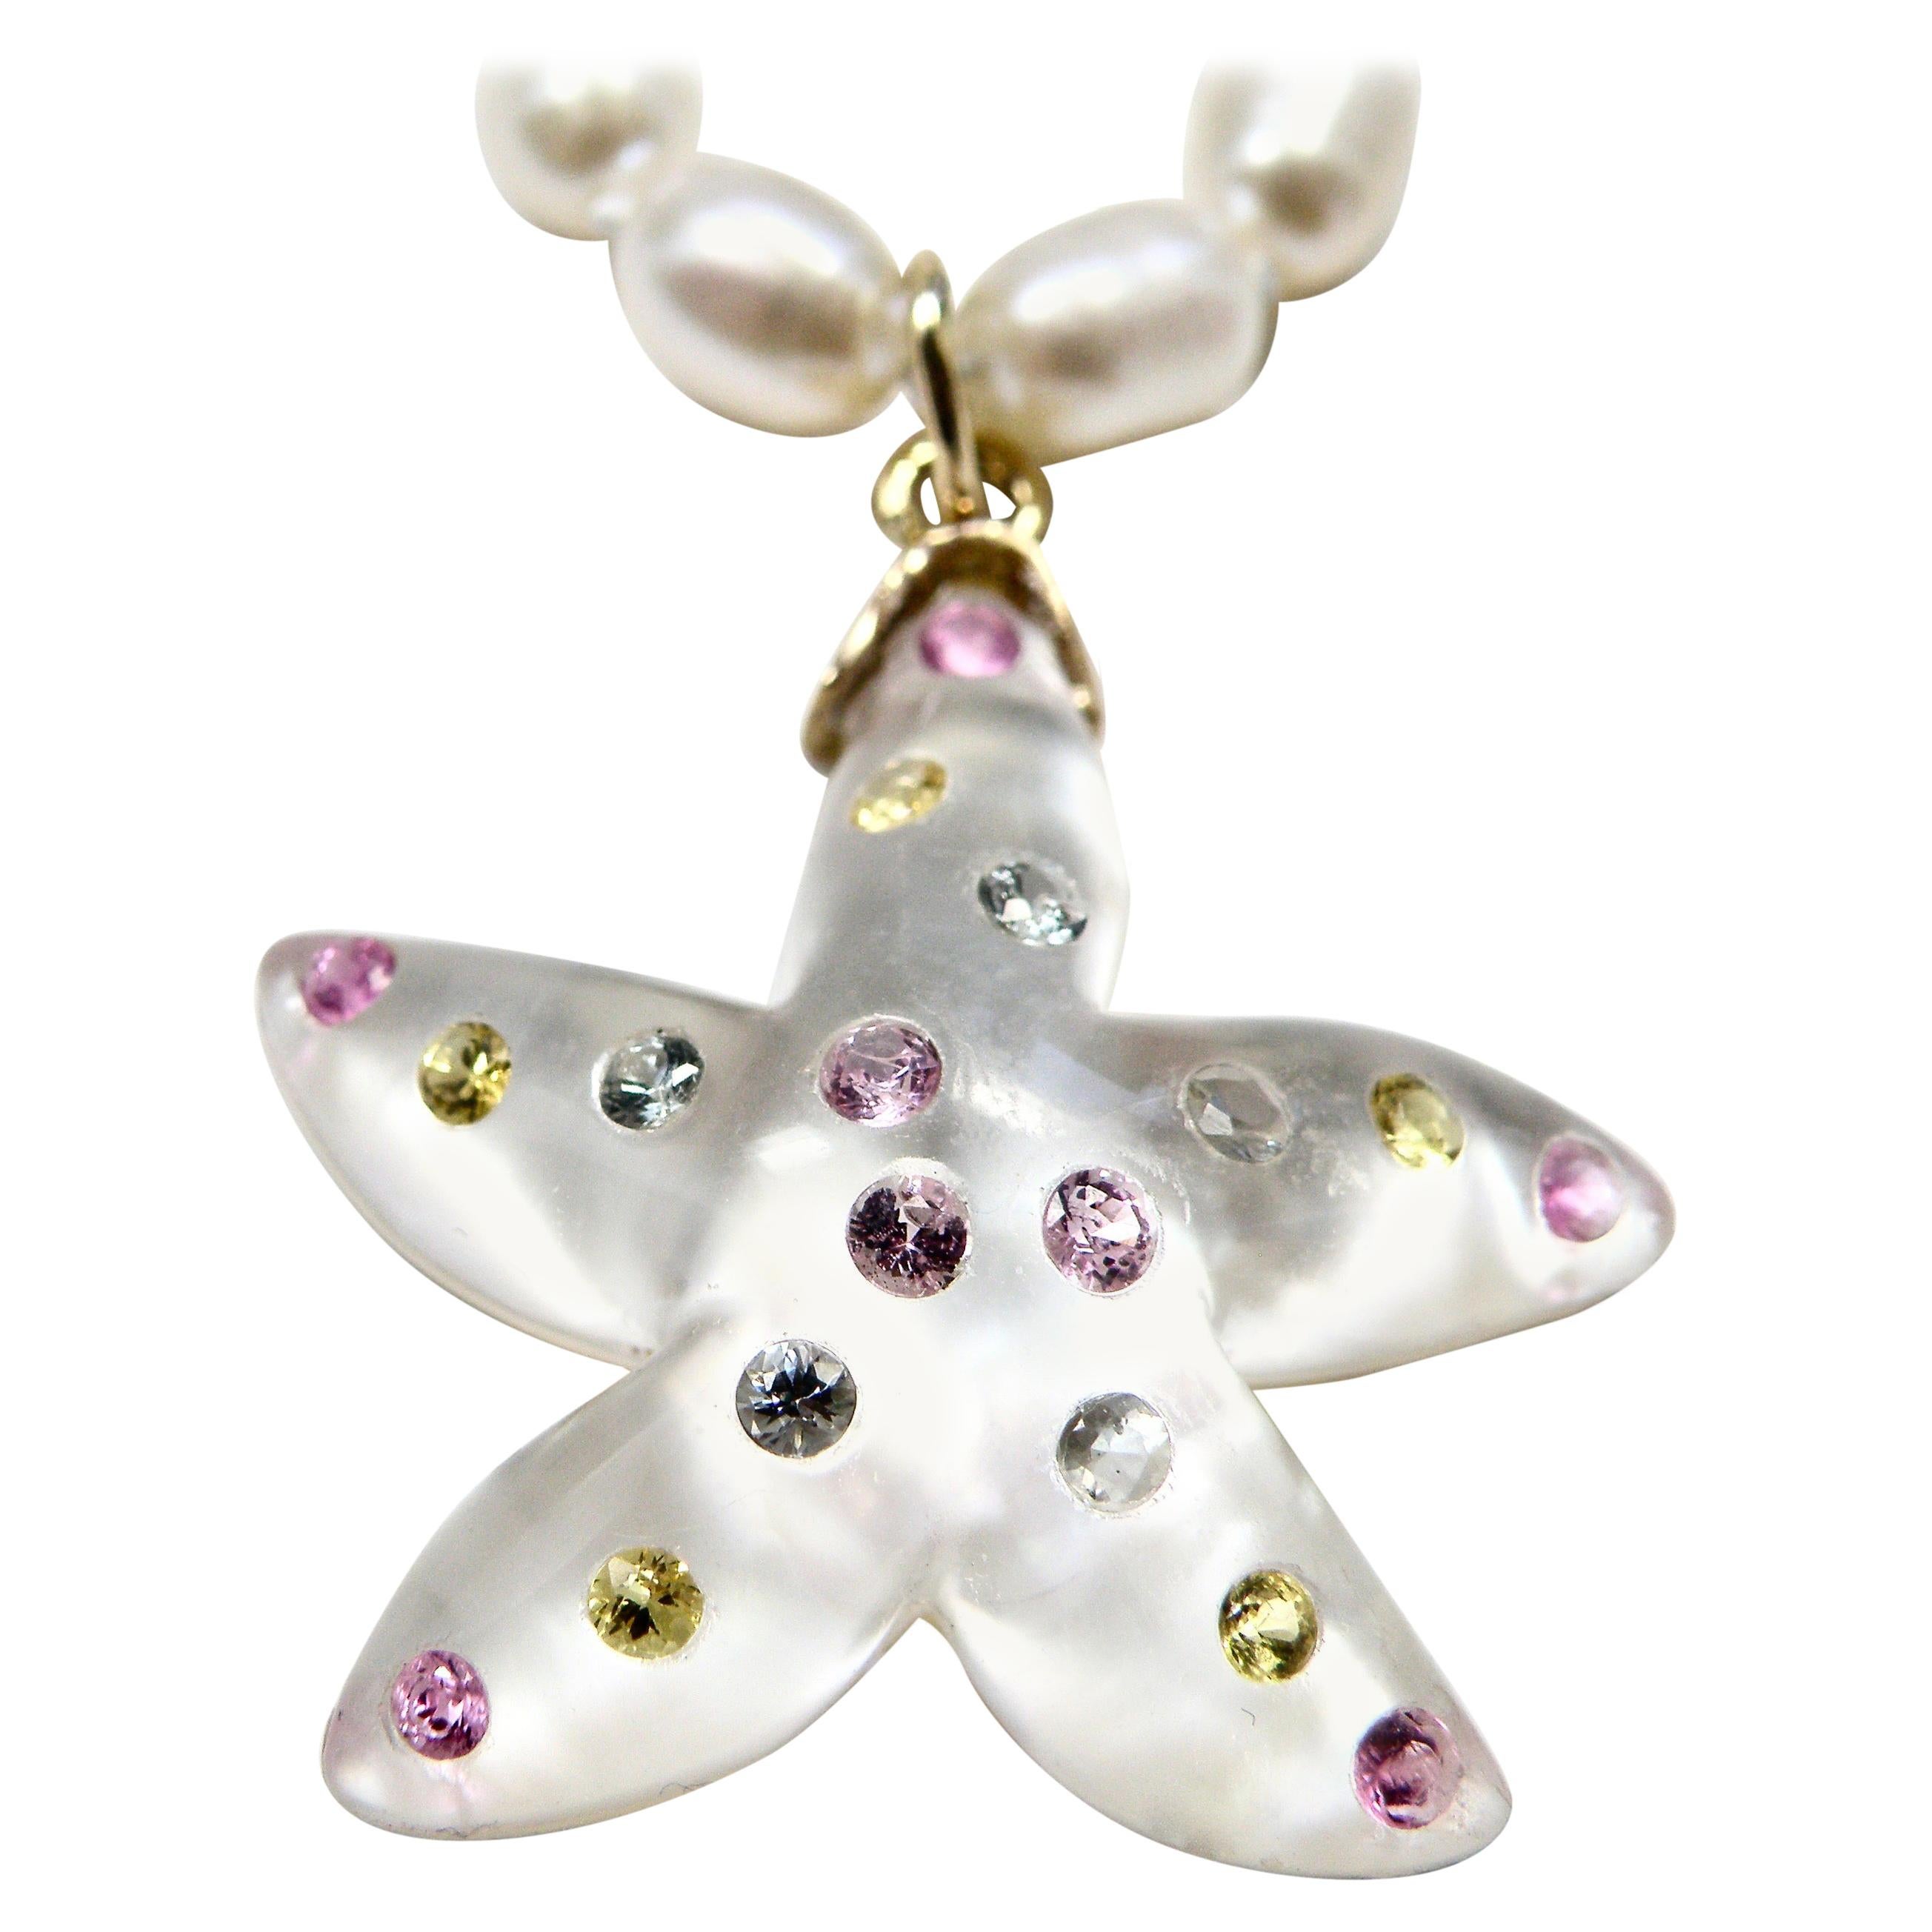 Mother of Pearl "Starfish" Pendant